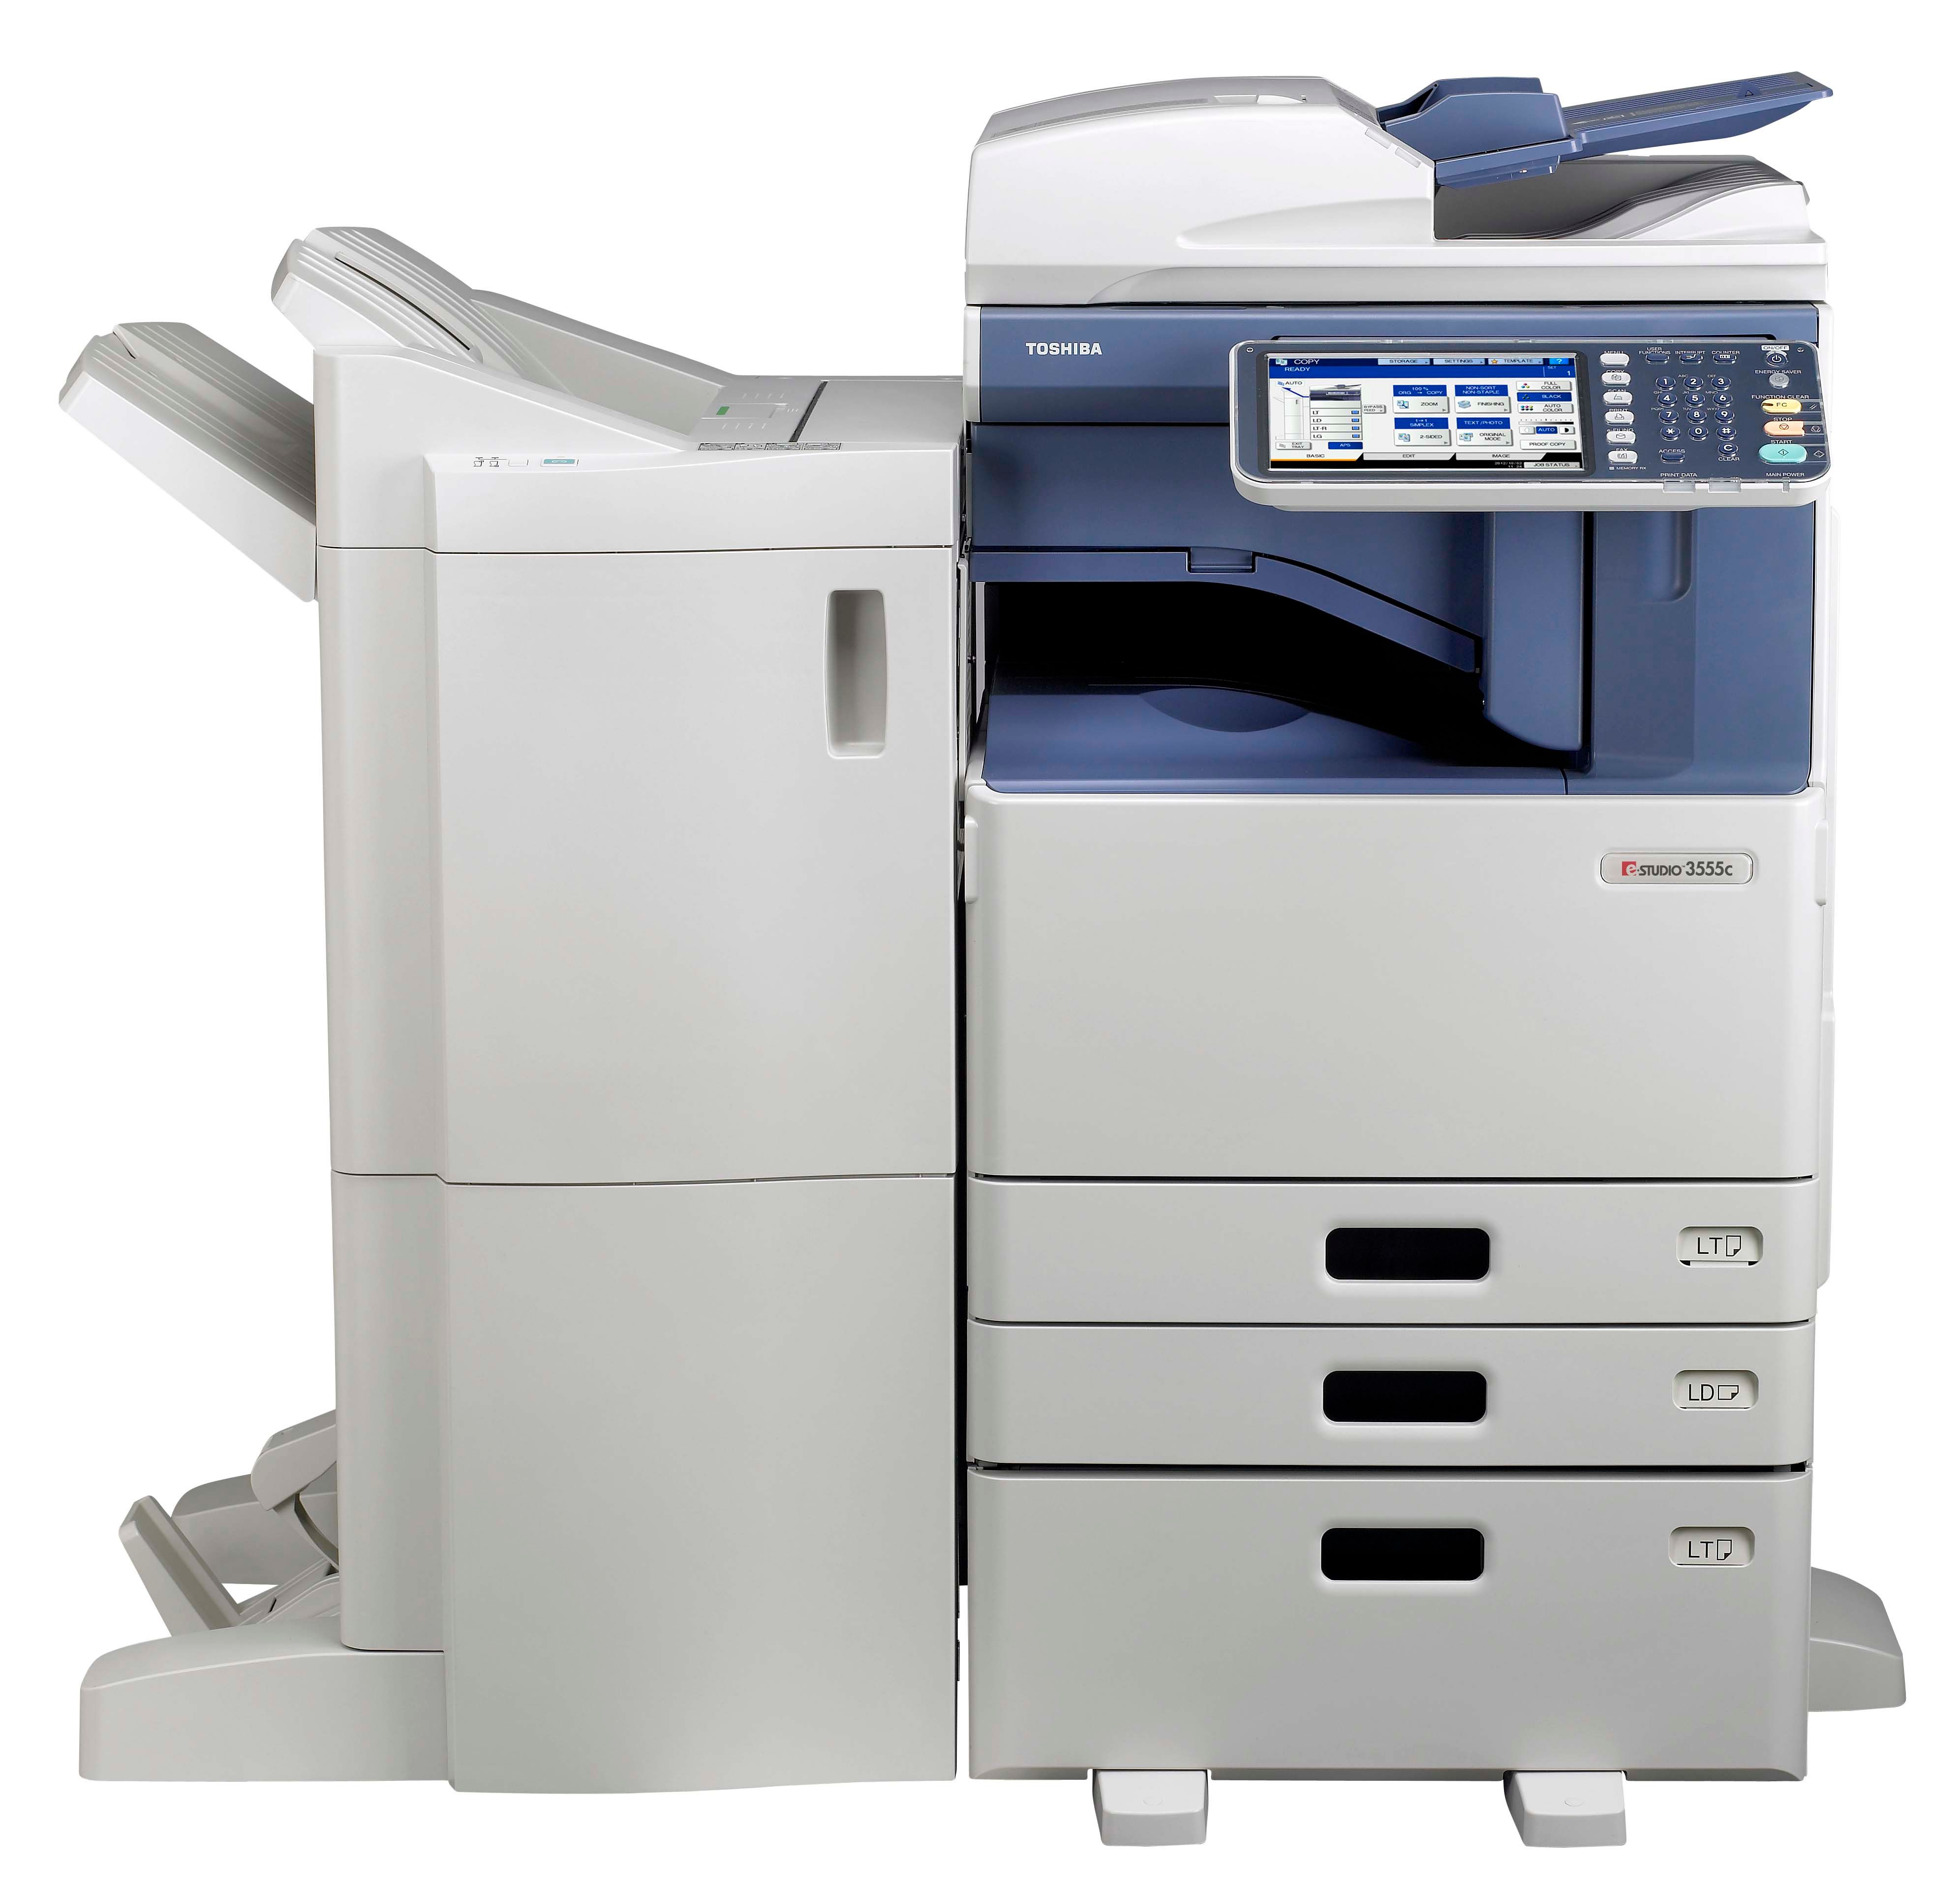 Multifunction toshiba photocopier for sale at affordable price